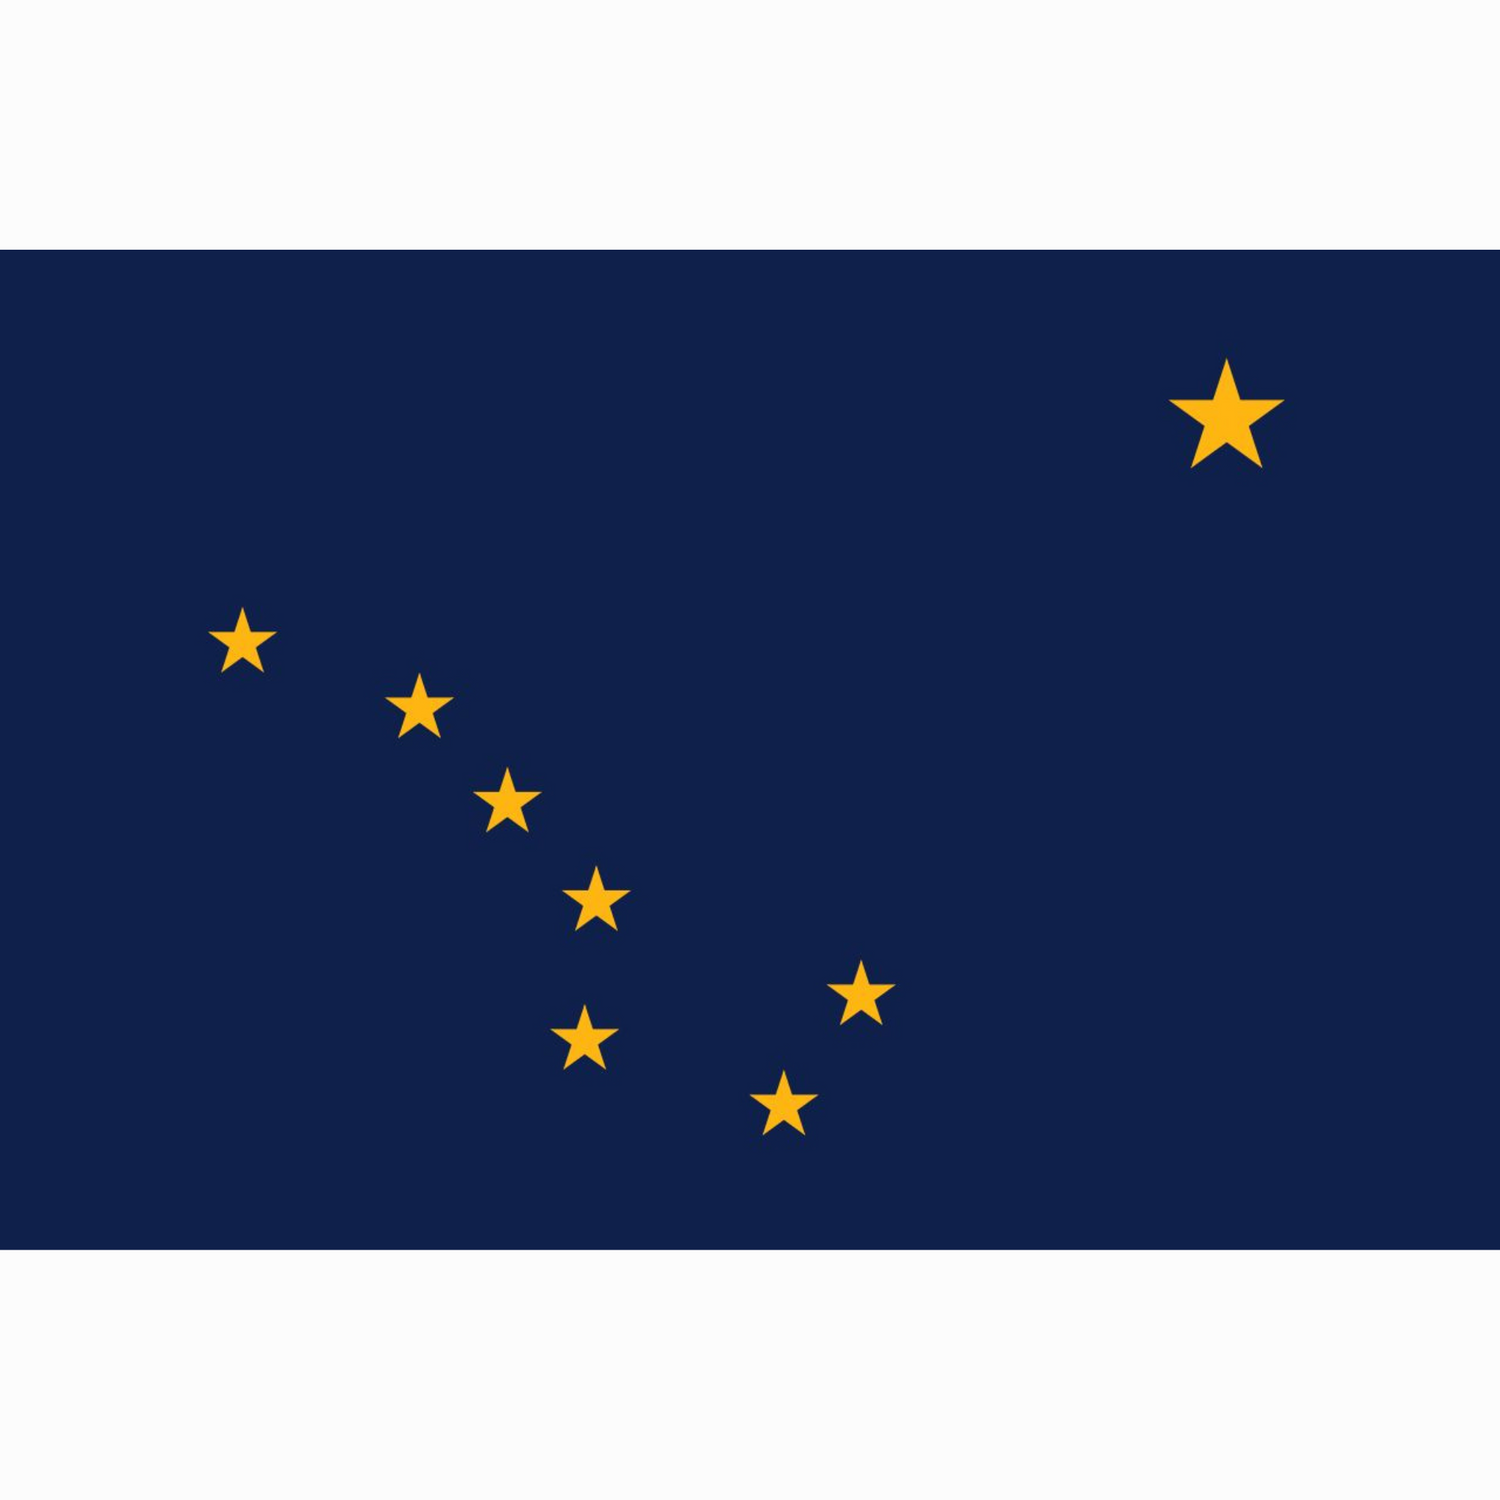 The official state flag of Alaska was adopted in 1927 and showcases a blue field with eight gold stars. - History By Mail